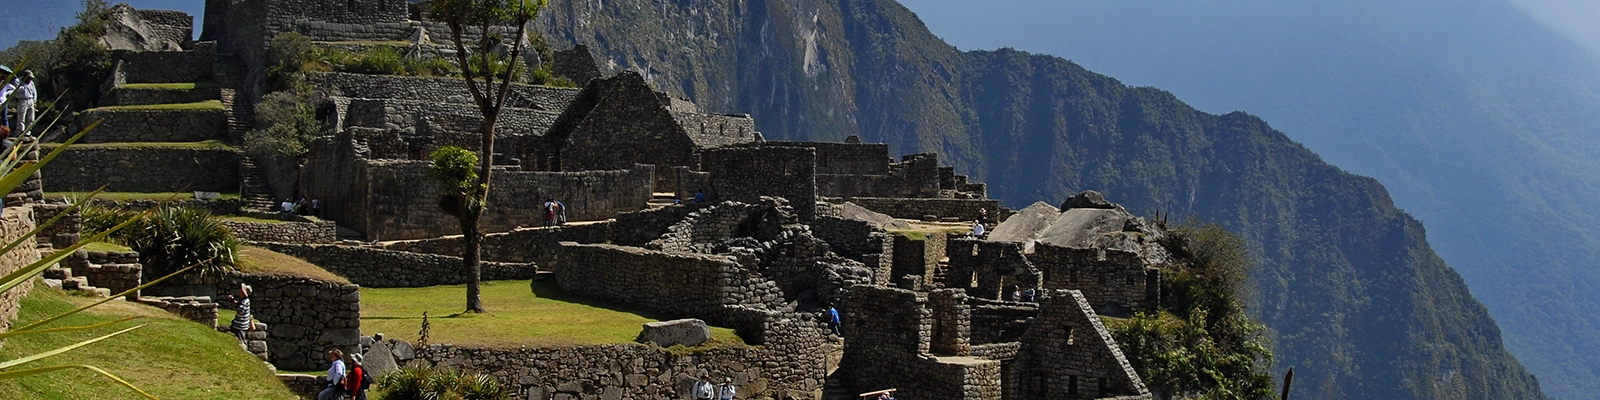 Machu Picchu, ancient Incan citadel in the Andes mountains